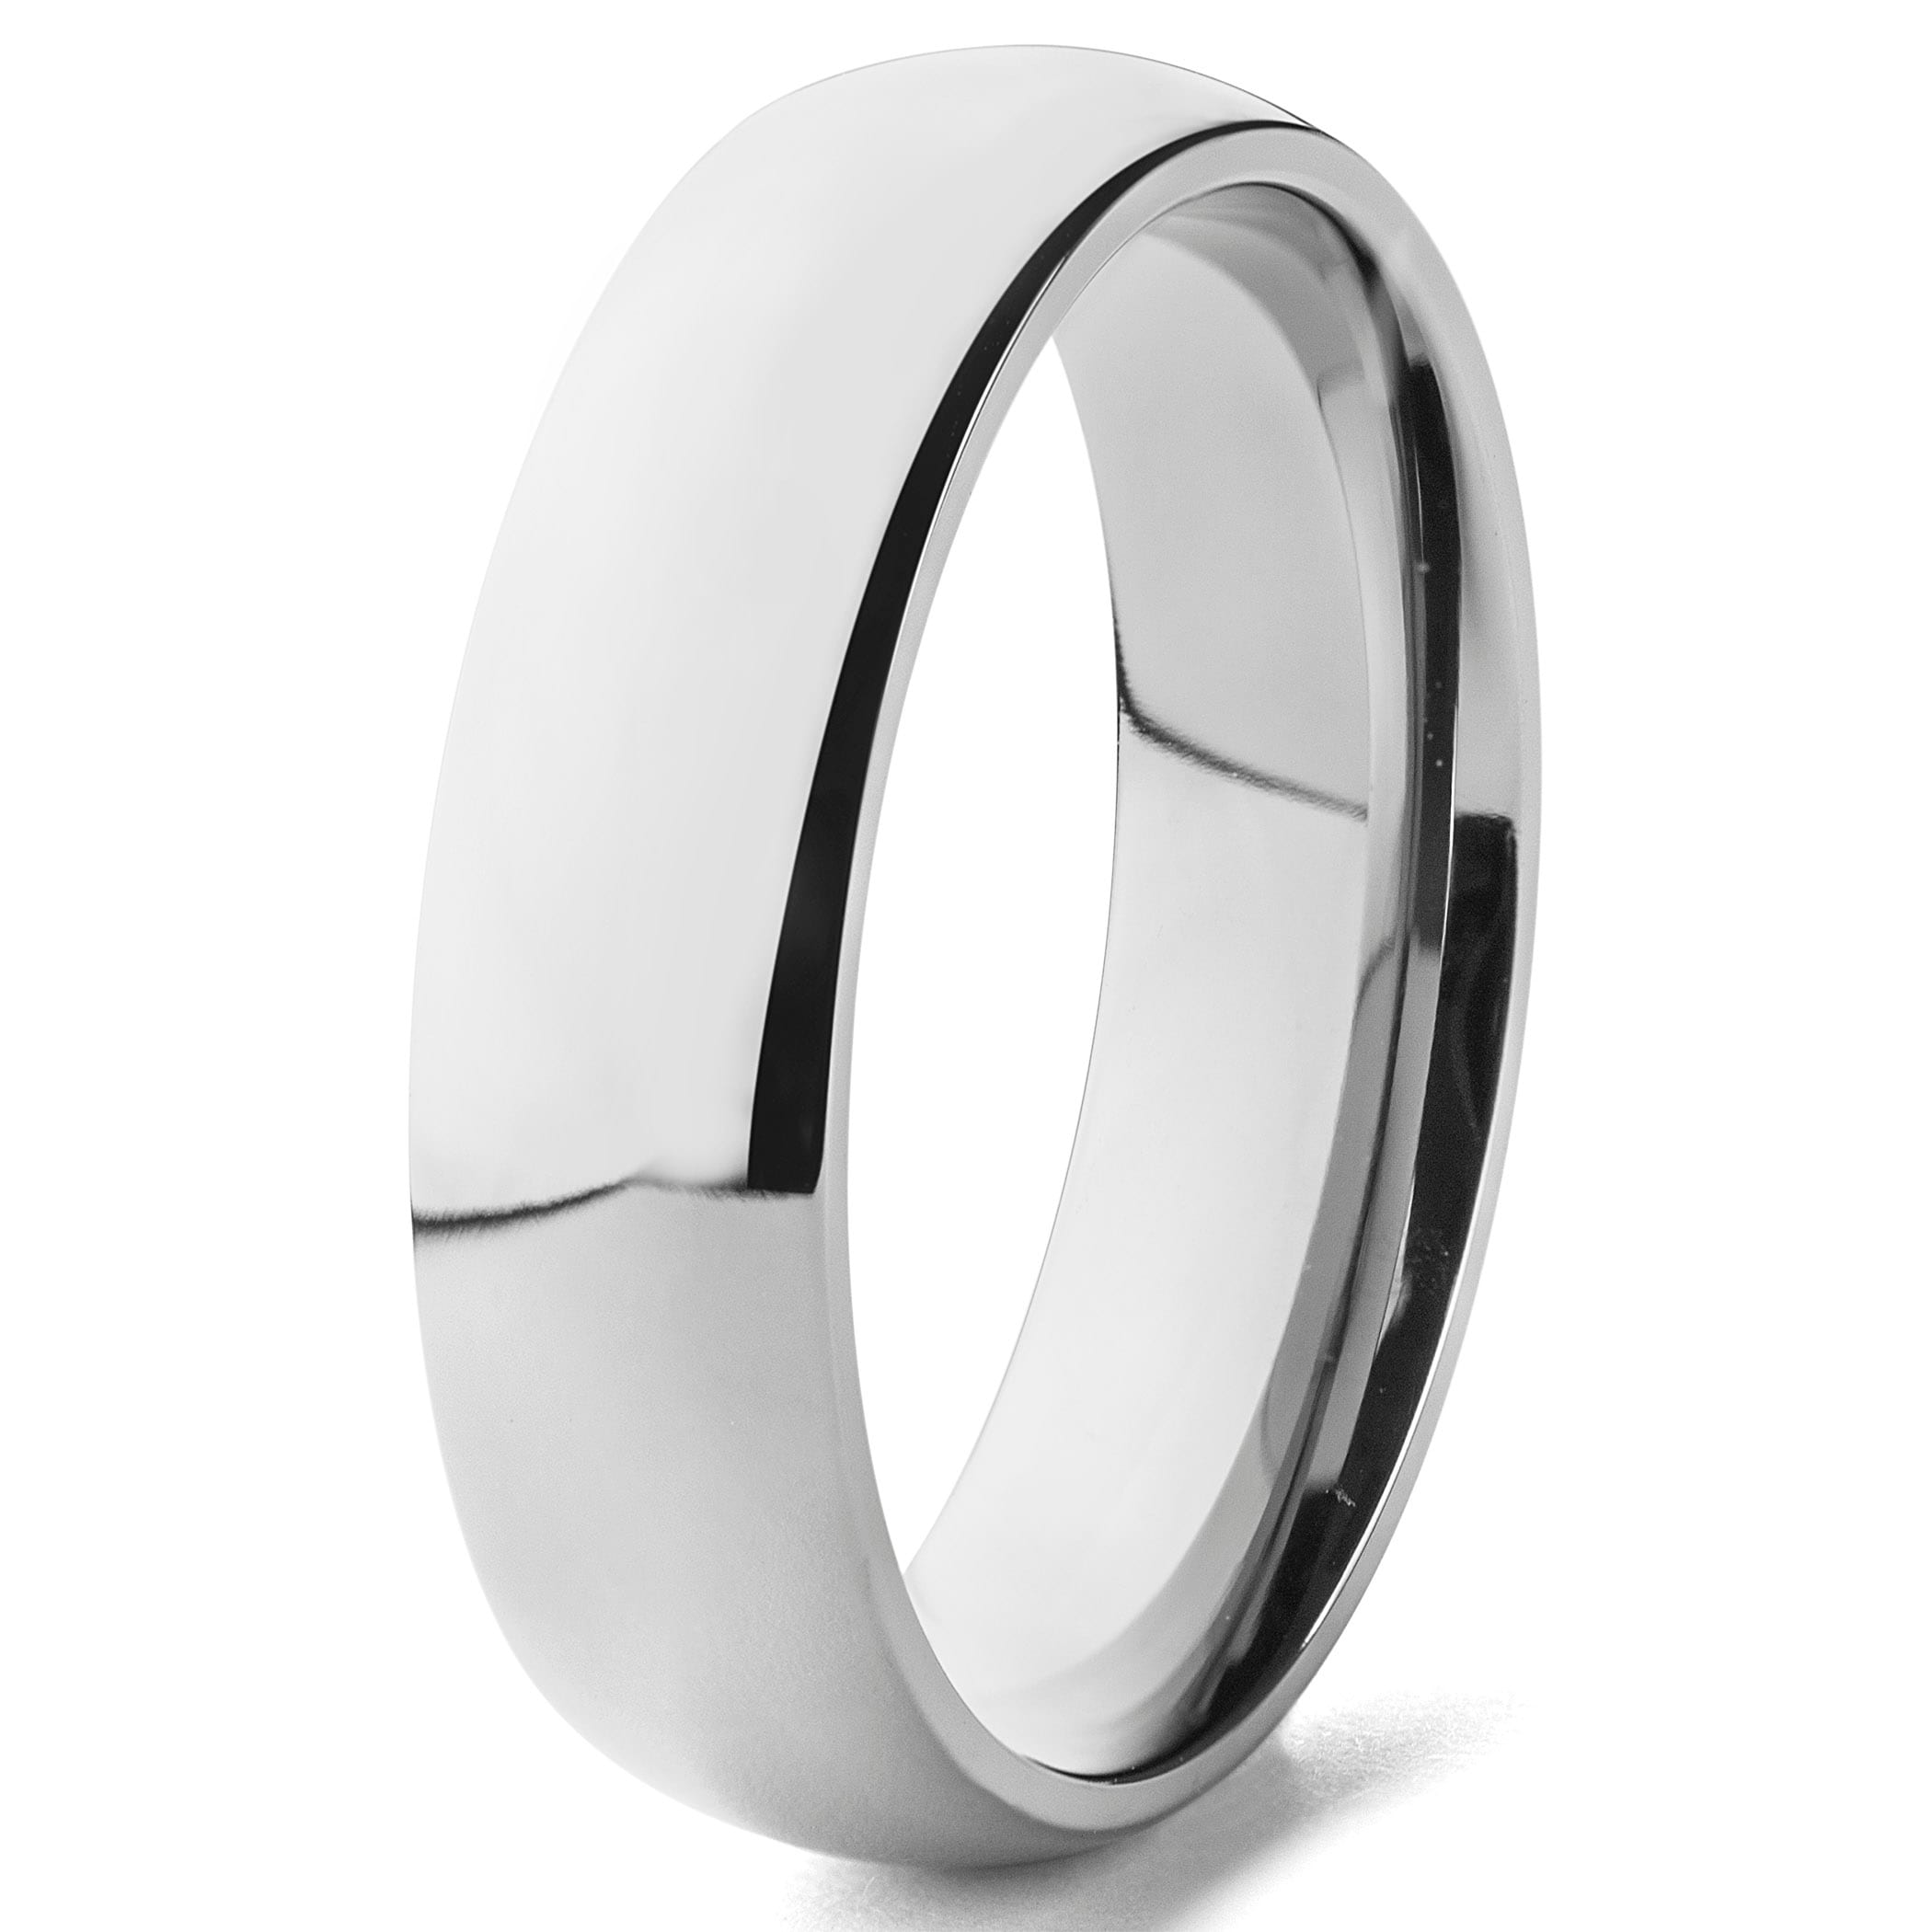 Noureda 6MM Stainless Steel High Polished Light Comfort Fit Traditional Dome Wedding Band Ring